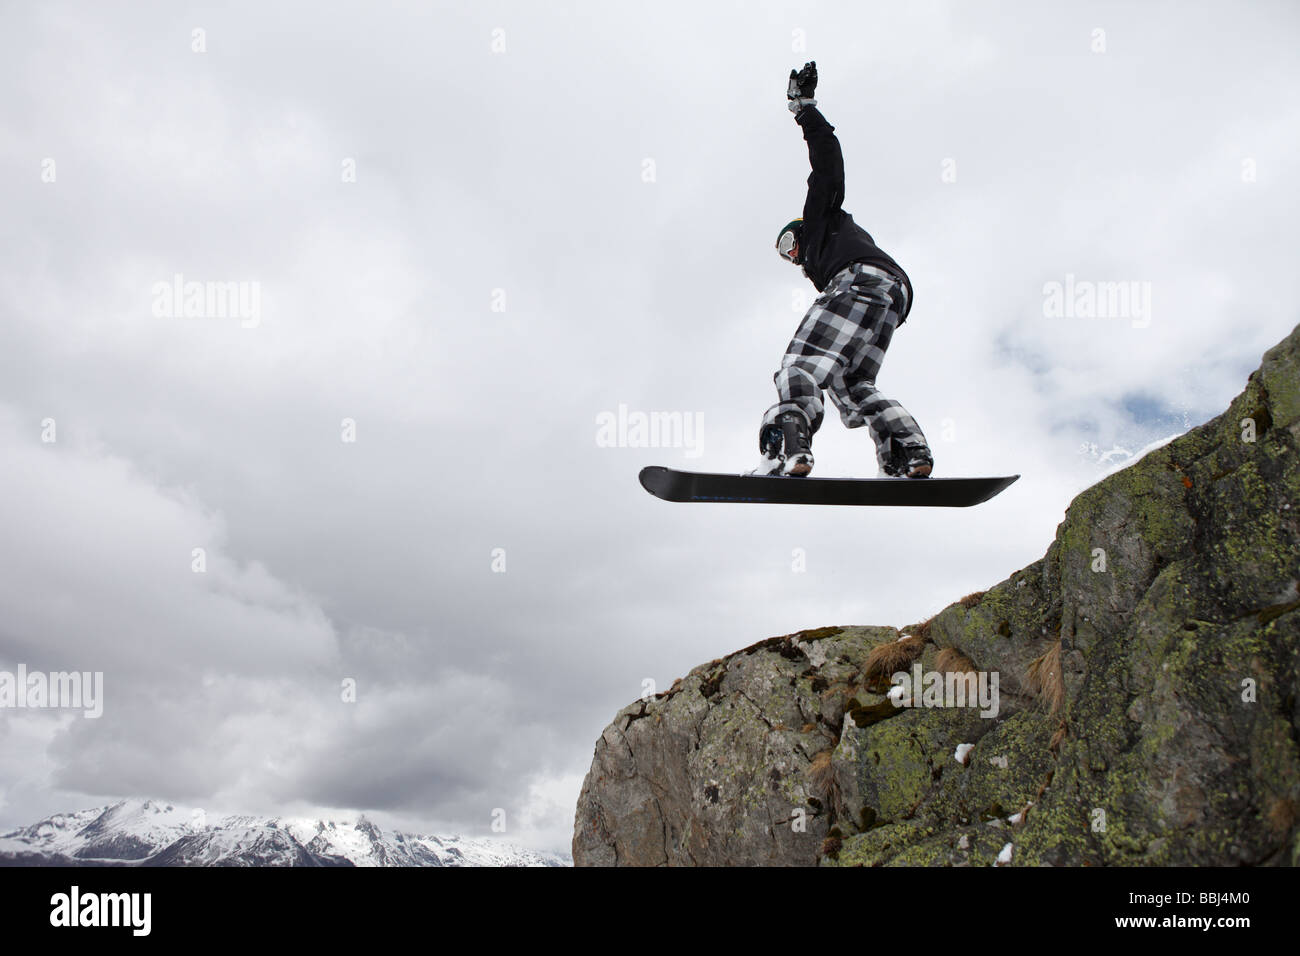 Snowboarder jumps off a cliff in the ski resort of Les Deux Alps, part of the Grande Galaxie Ski Area, The Alps, France Stock Photo